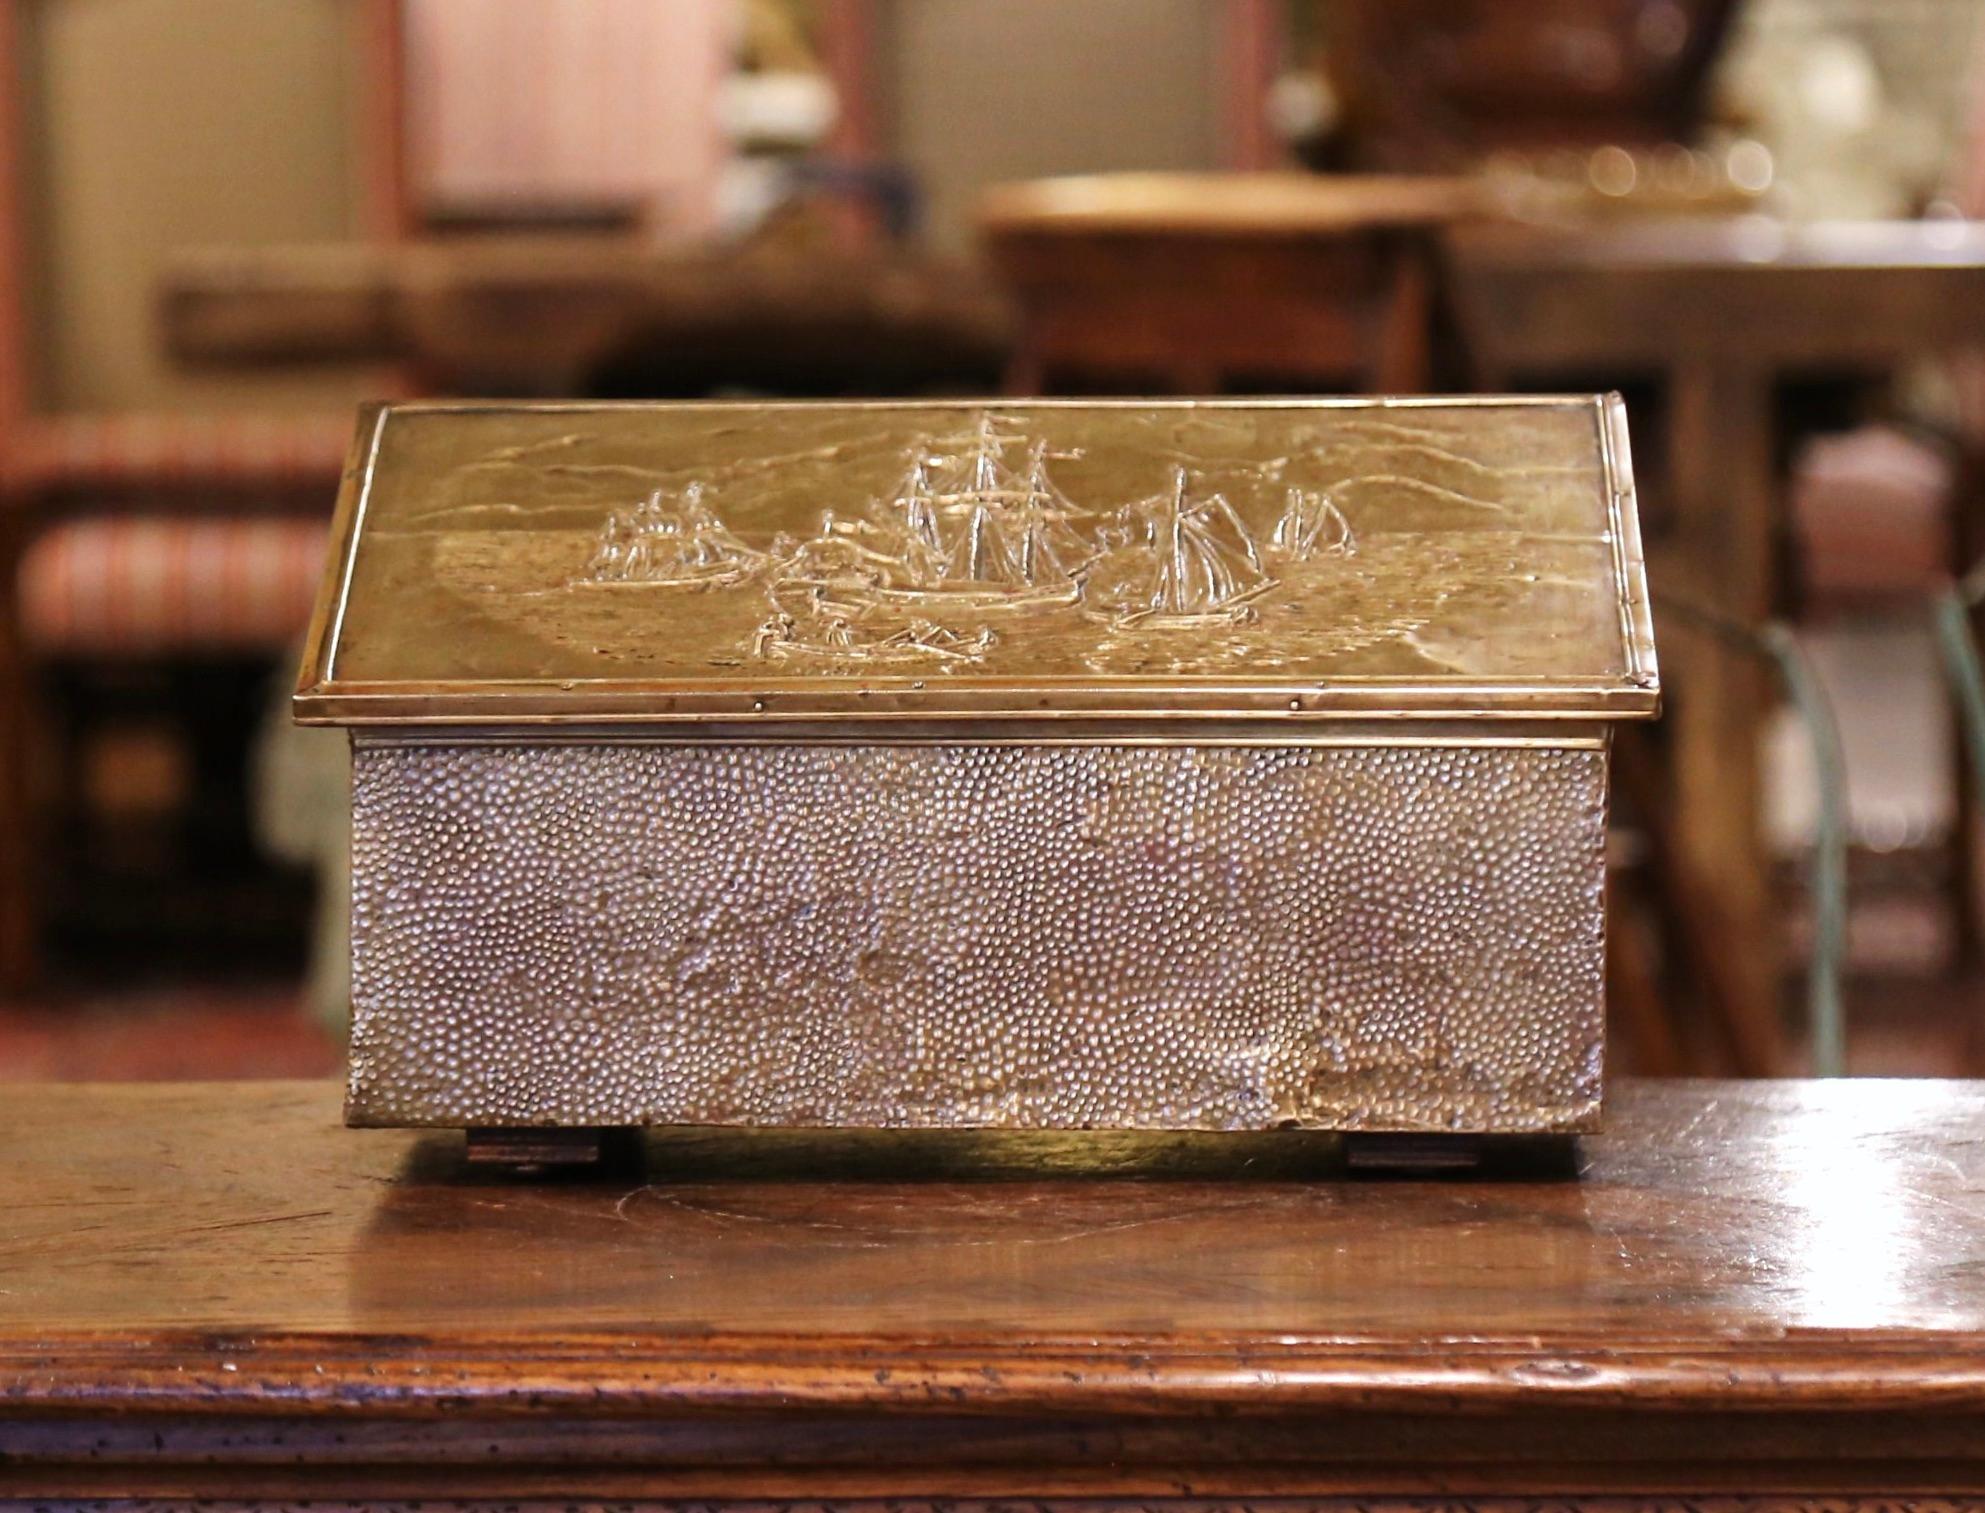 Crafted in France, circa 1920, the antique wood and brass coffer is decorated on the top with a repousse sail boat scene in the manner of Claude Vernet. The slant top opens to inside storage upholstered with green velvet. The small decorative trunk